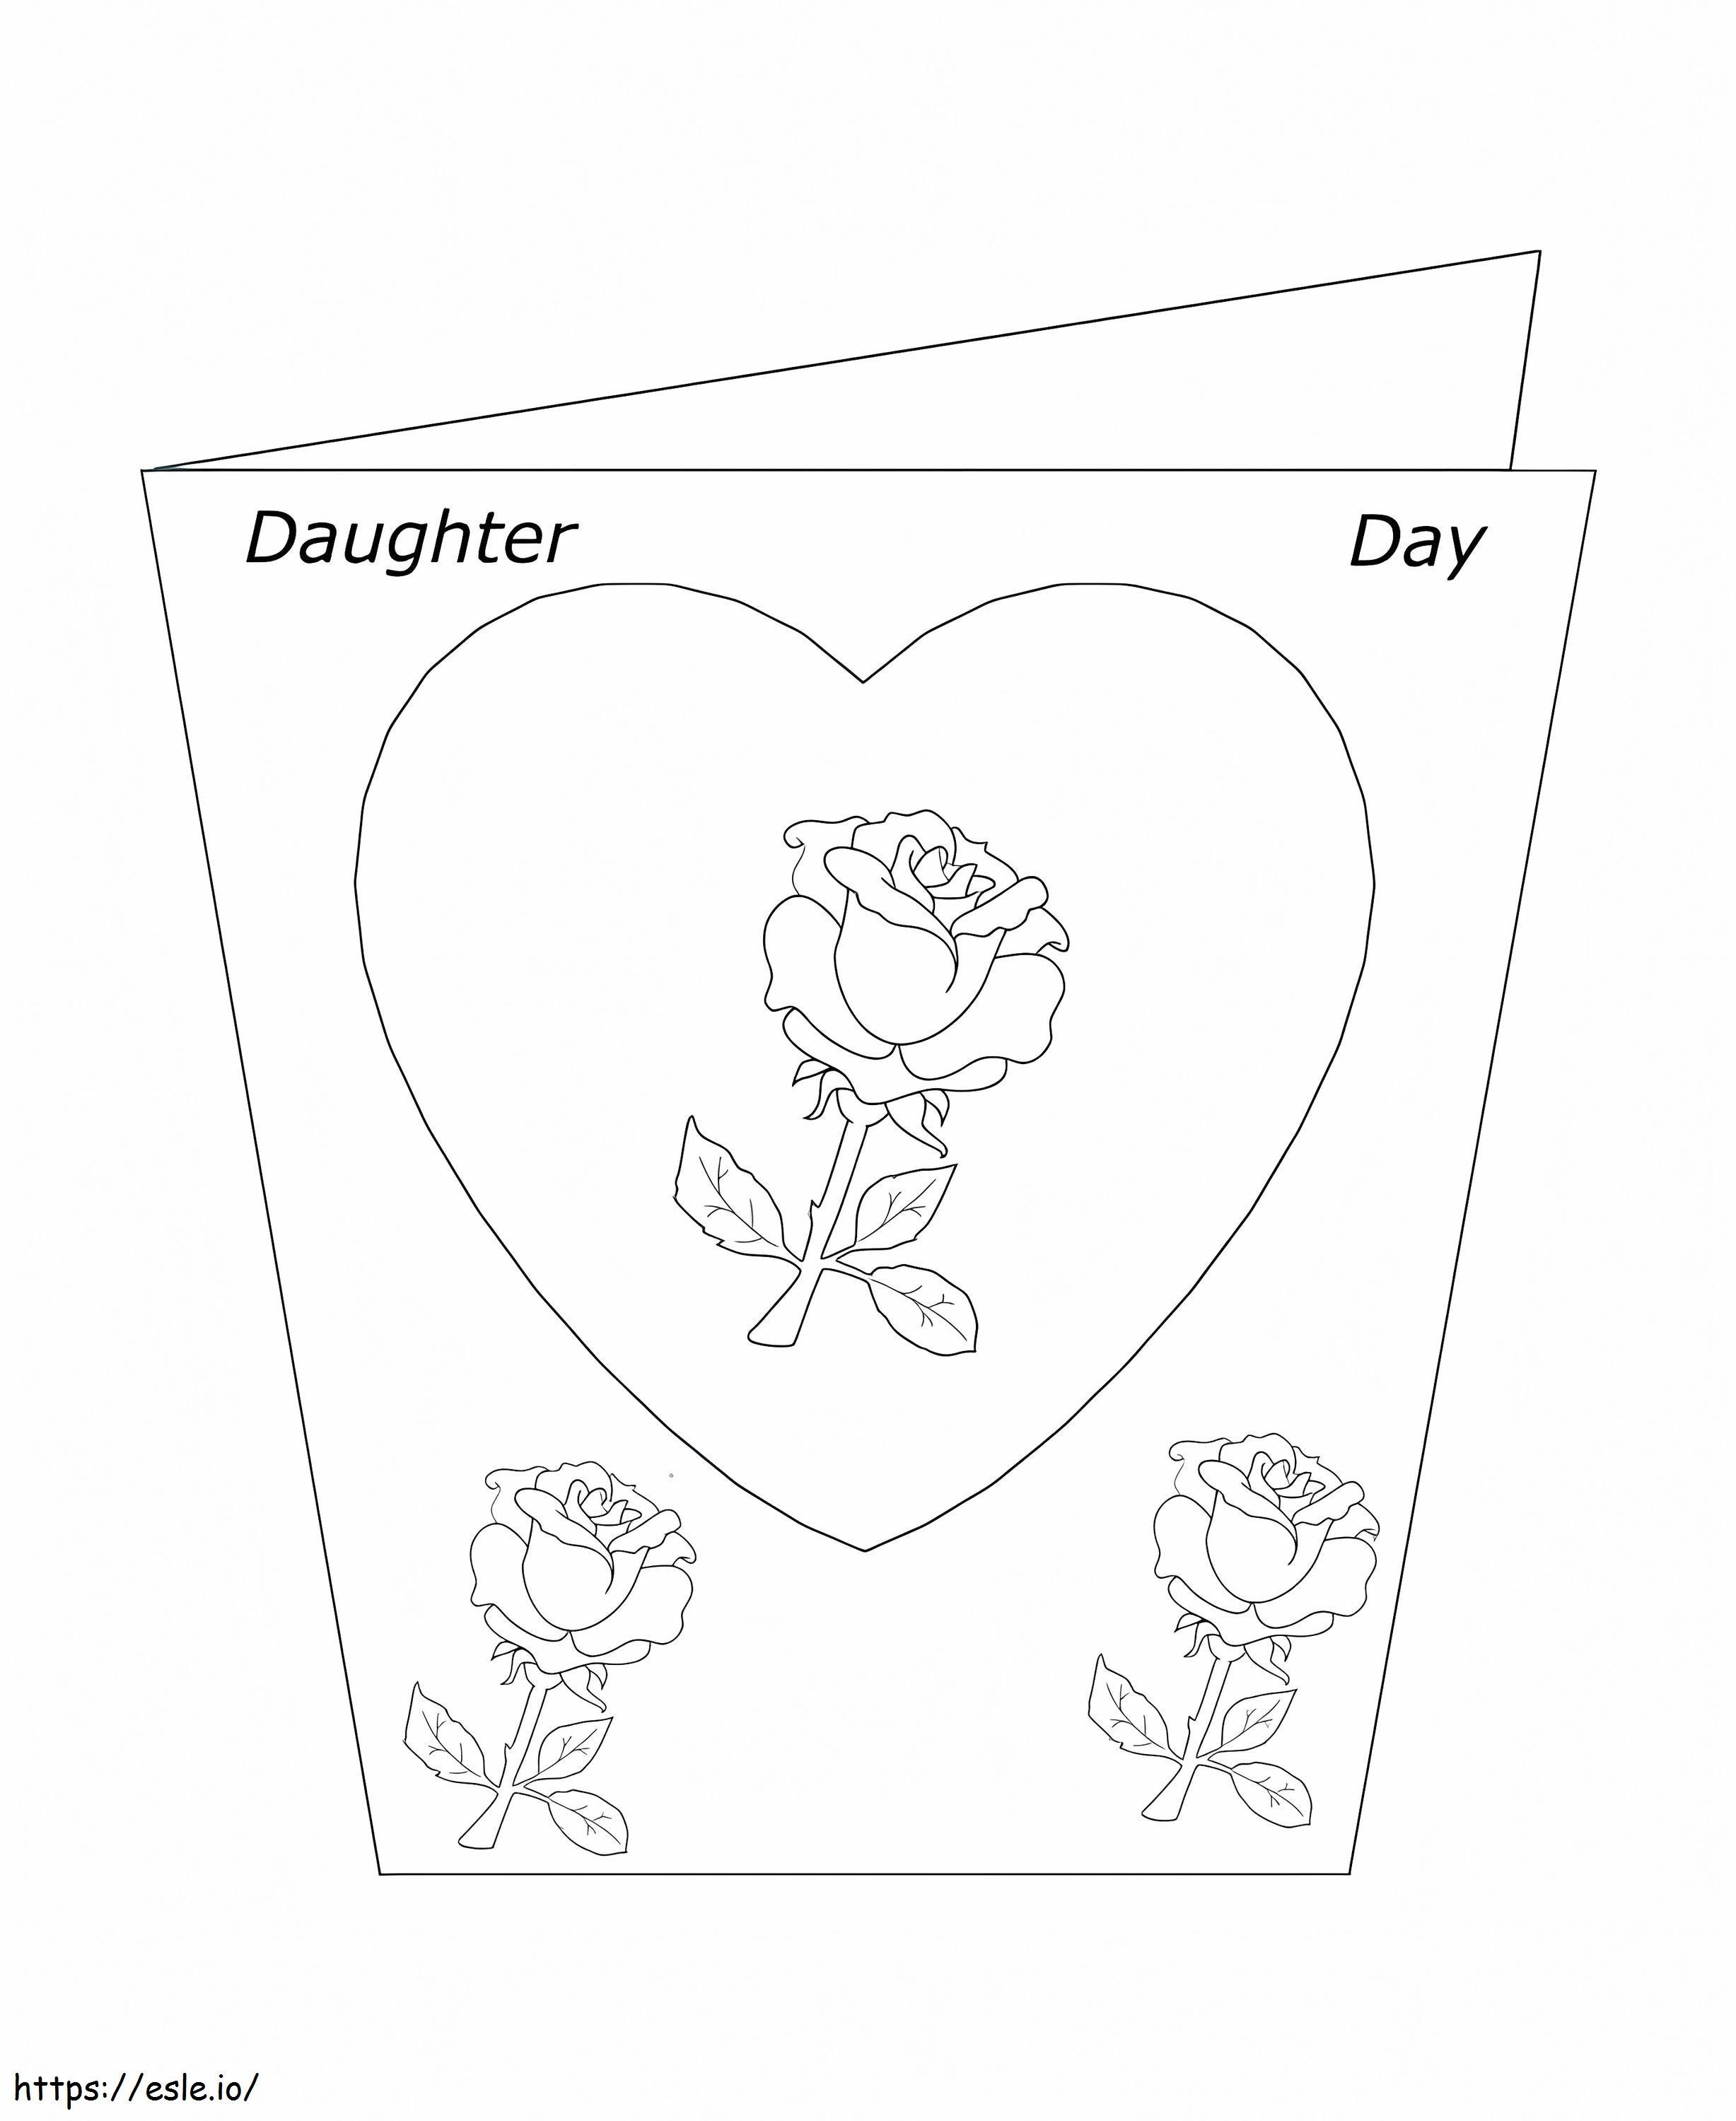 Daughters Day Card coloring page